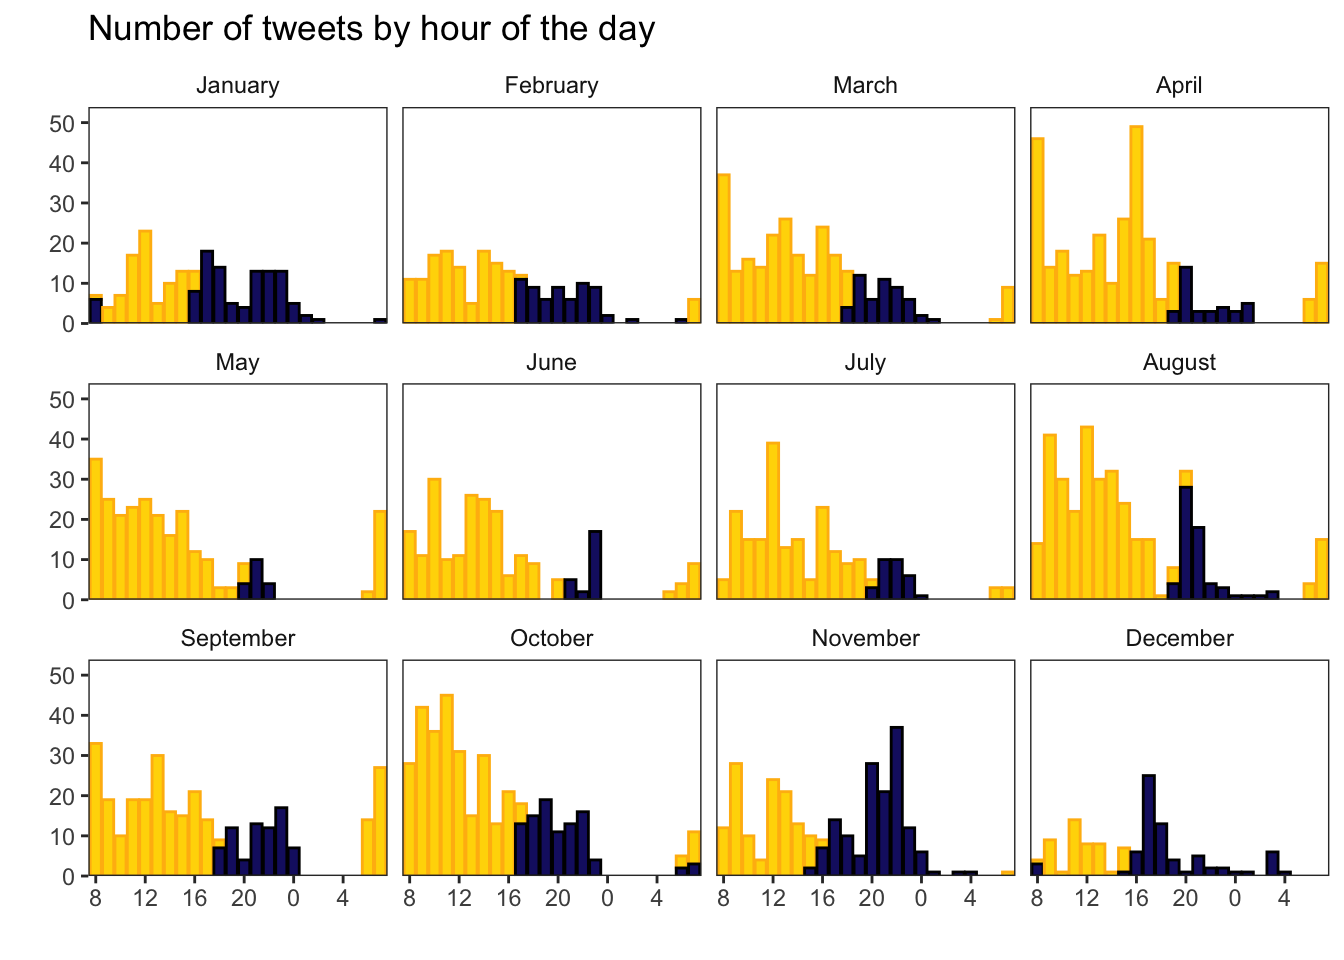 Tweets per hour of the day